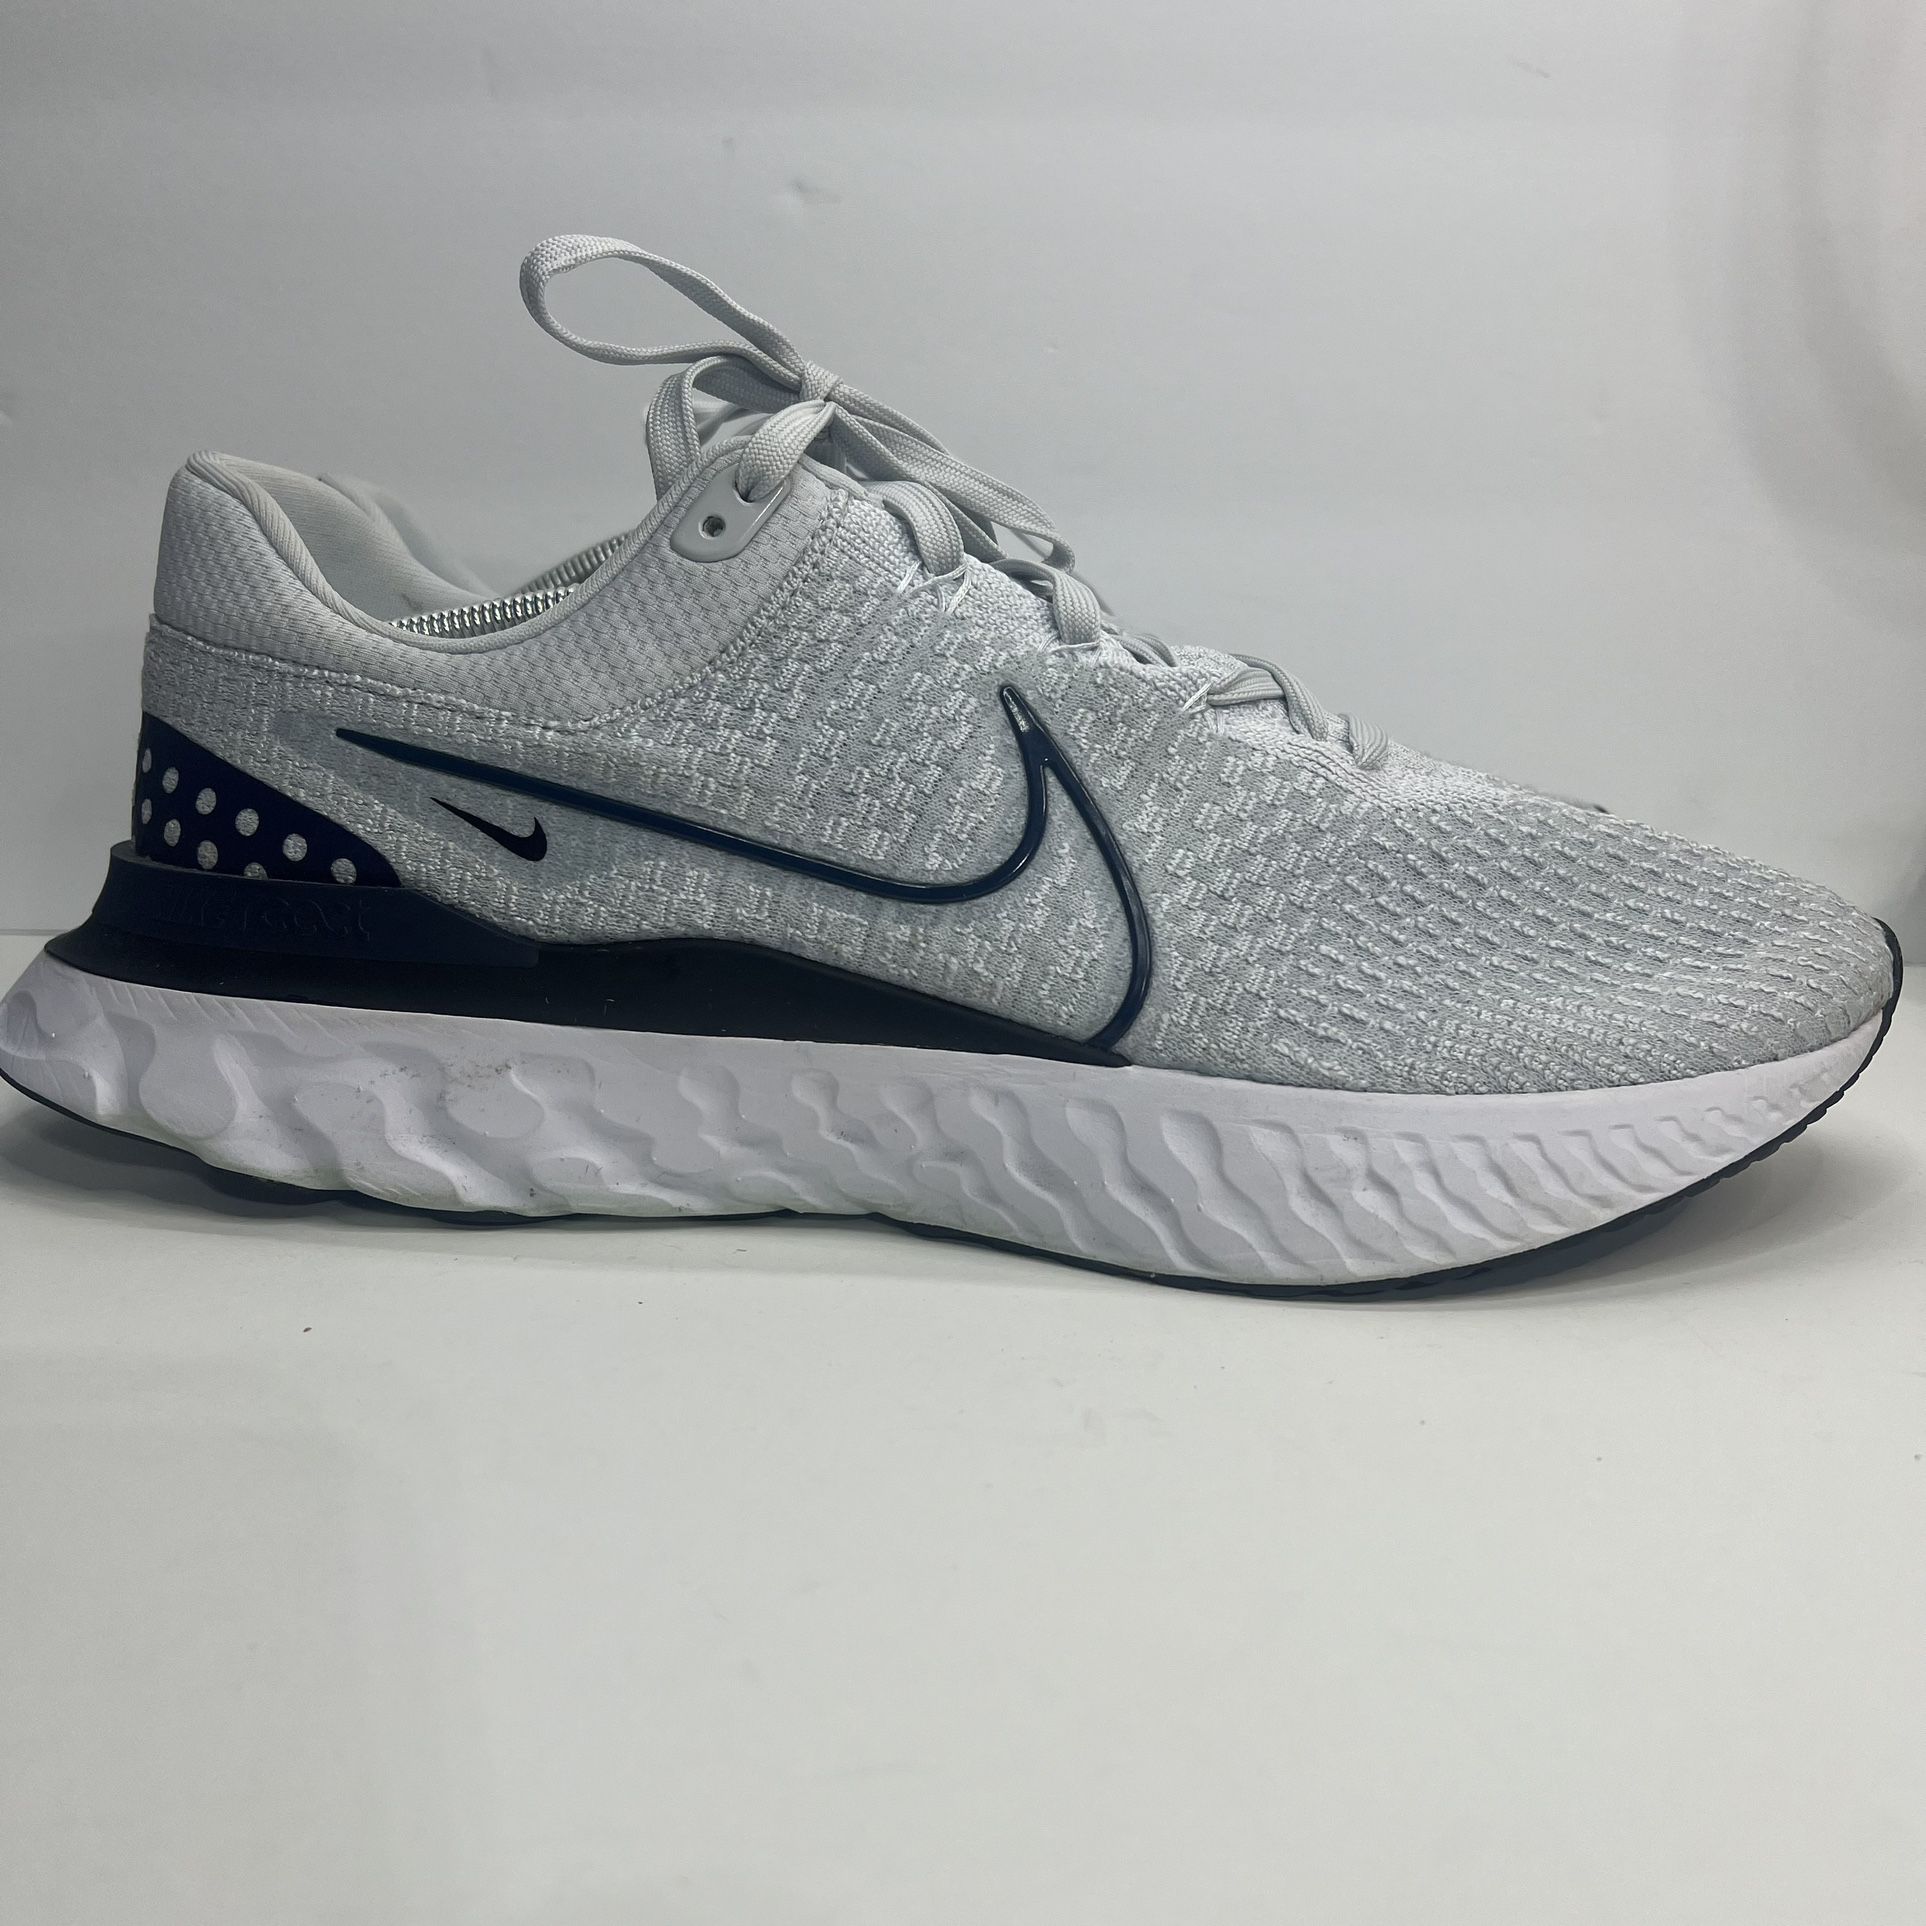 Nike React Infinity Run Flyknit 3 TB Athletic Shoes